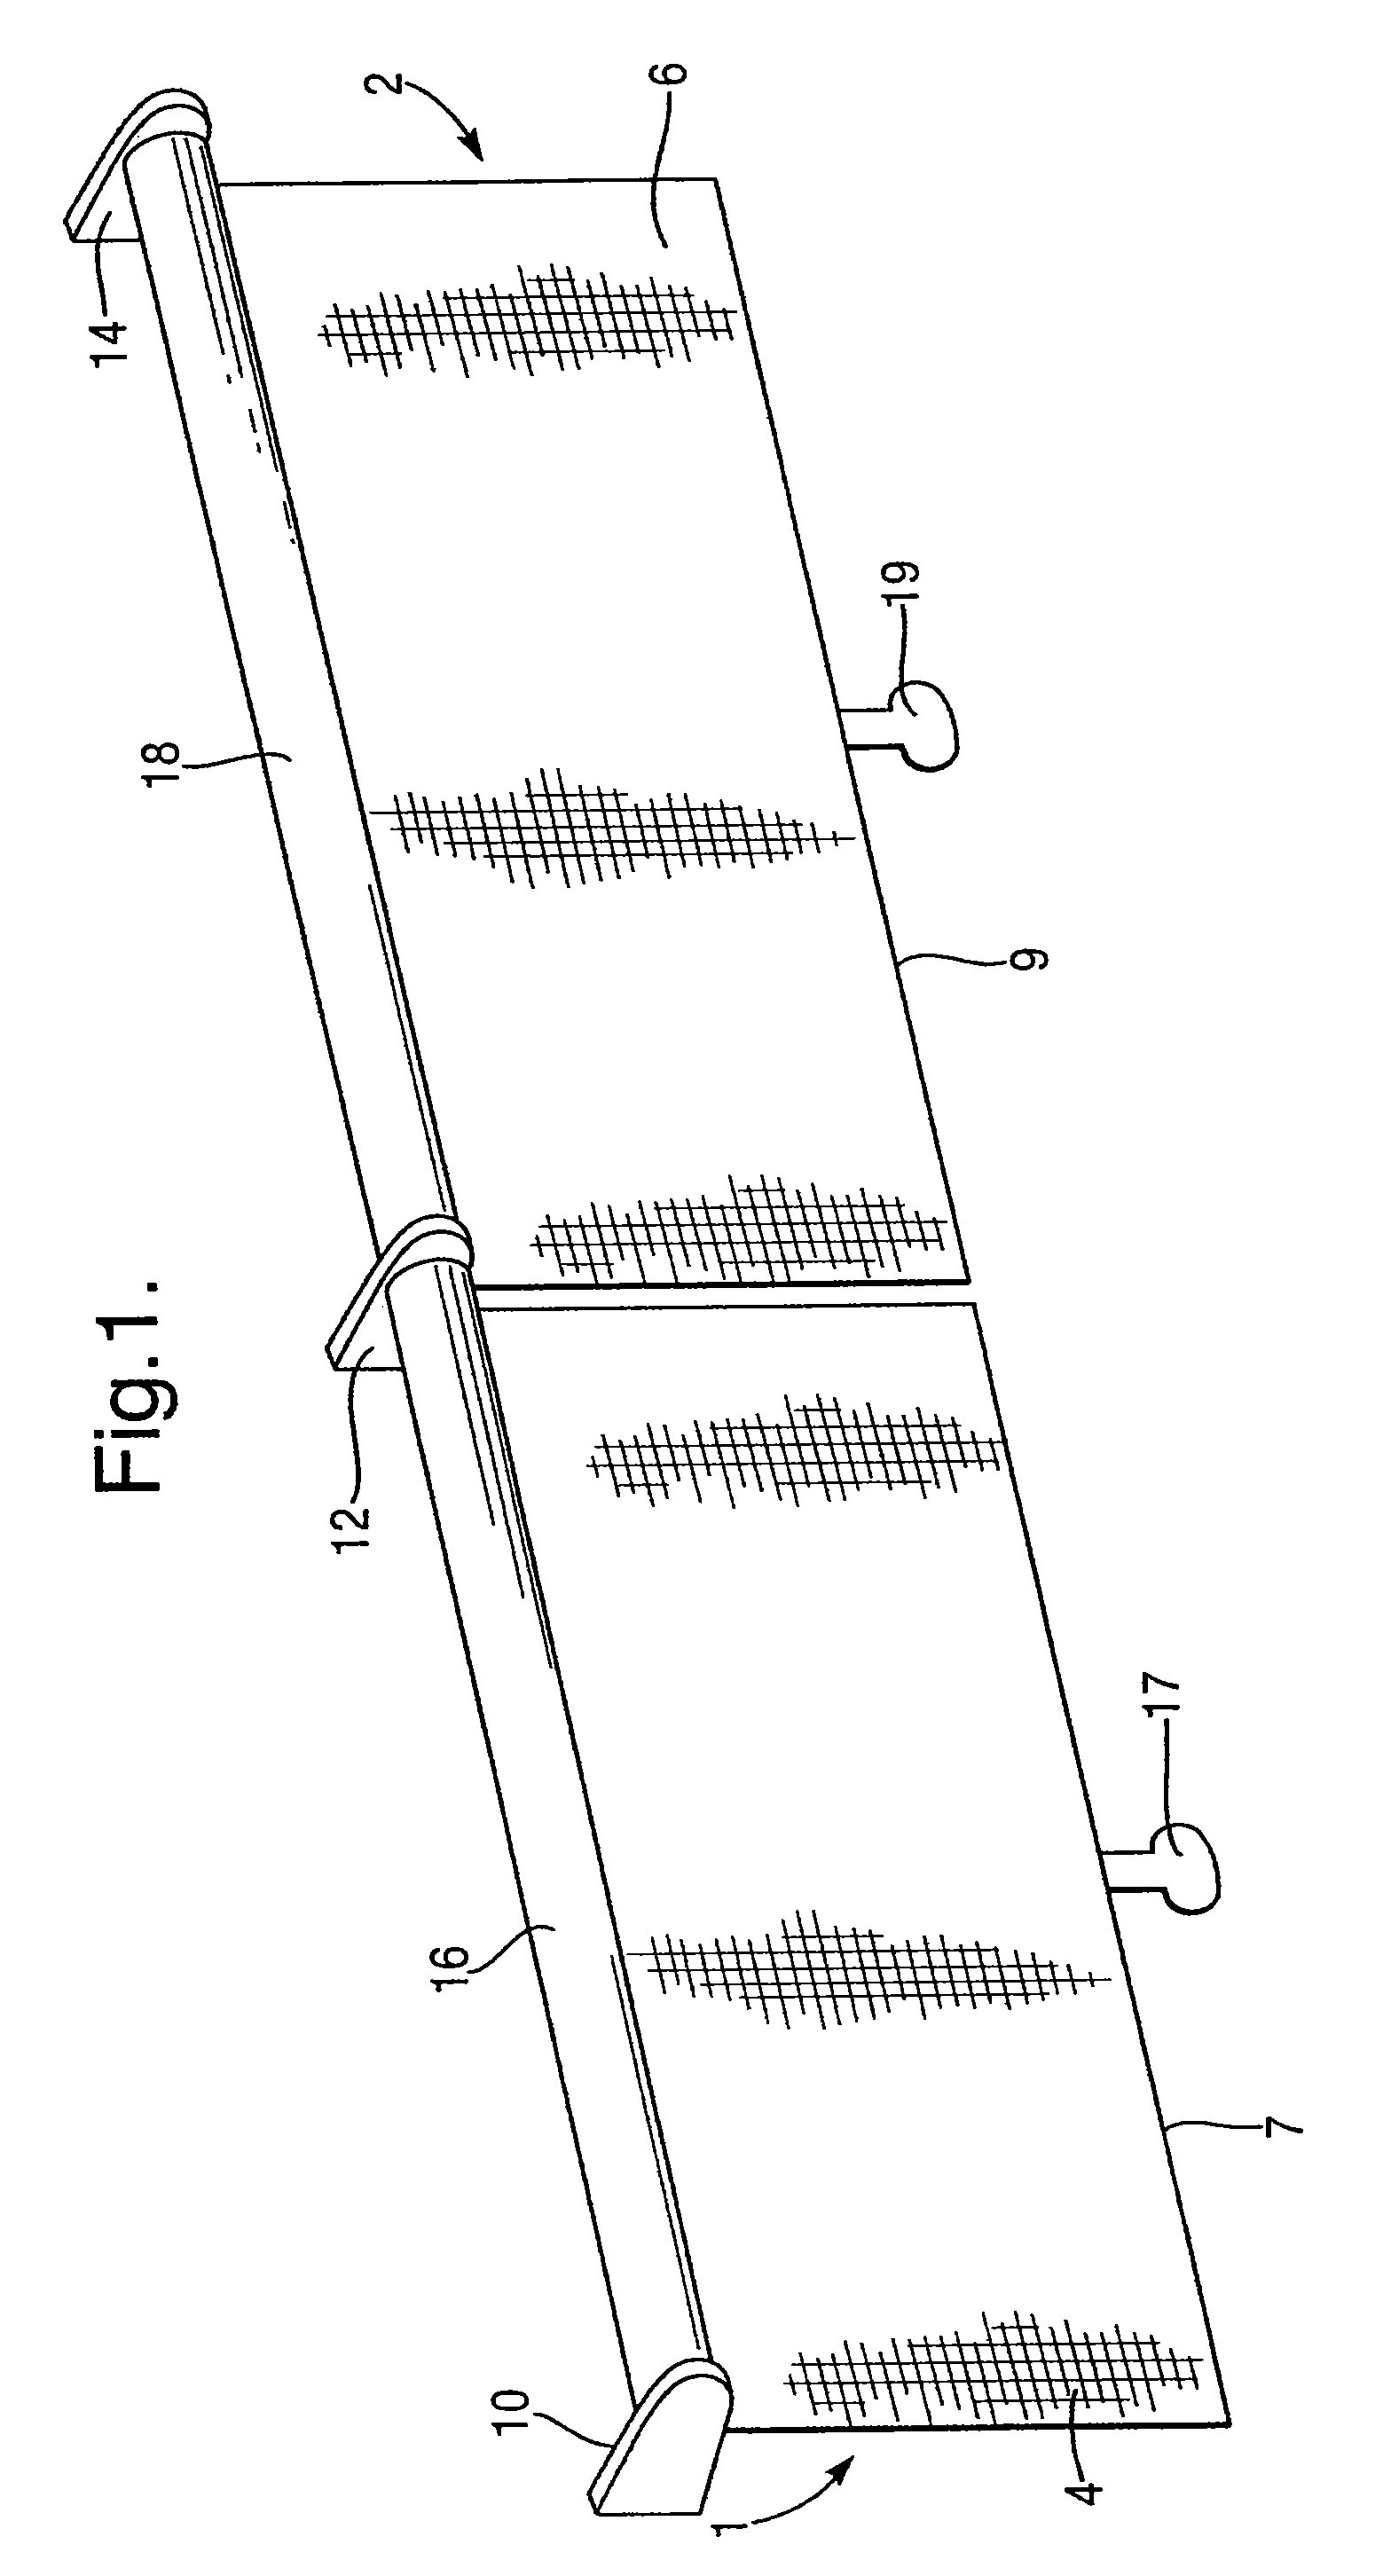 Adjustable drive coupling for adjacent architectural coverings